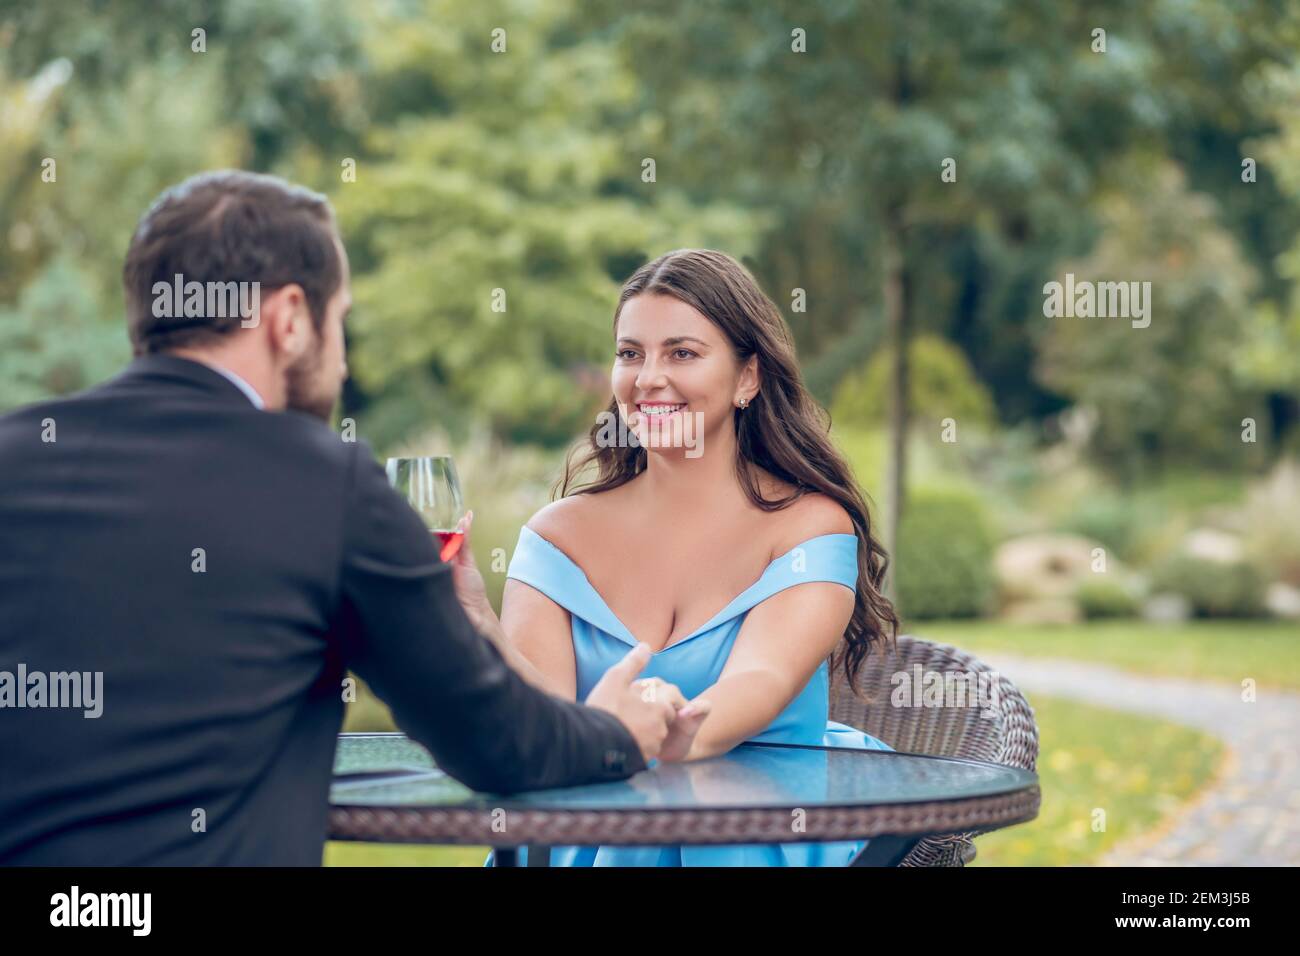 Woman and man touching hand sitting in outdoor cafe Stock Photo